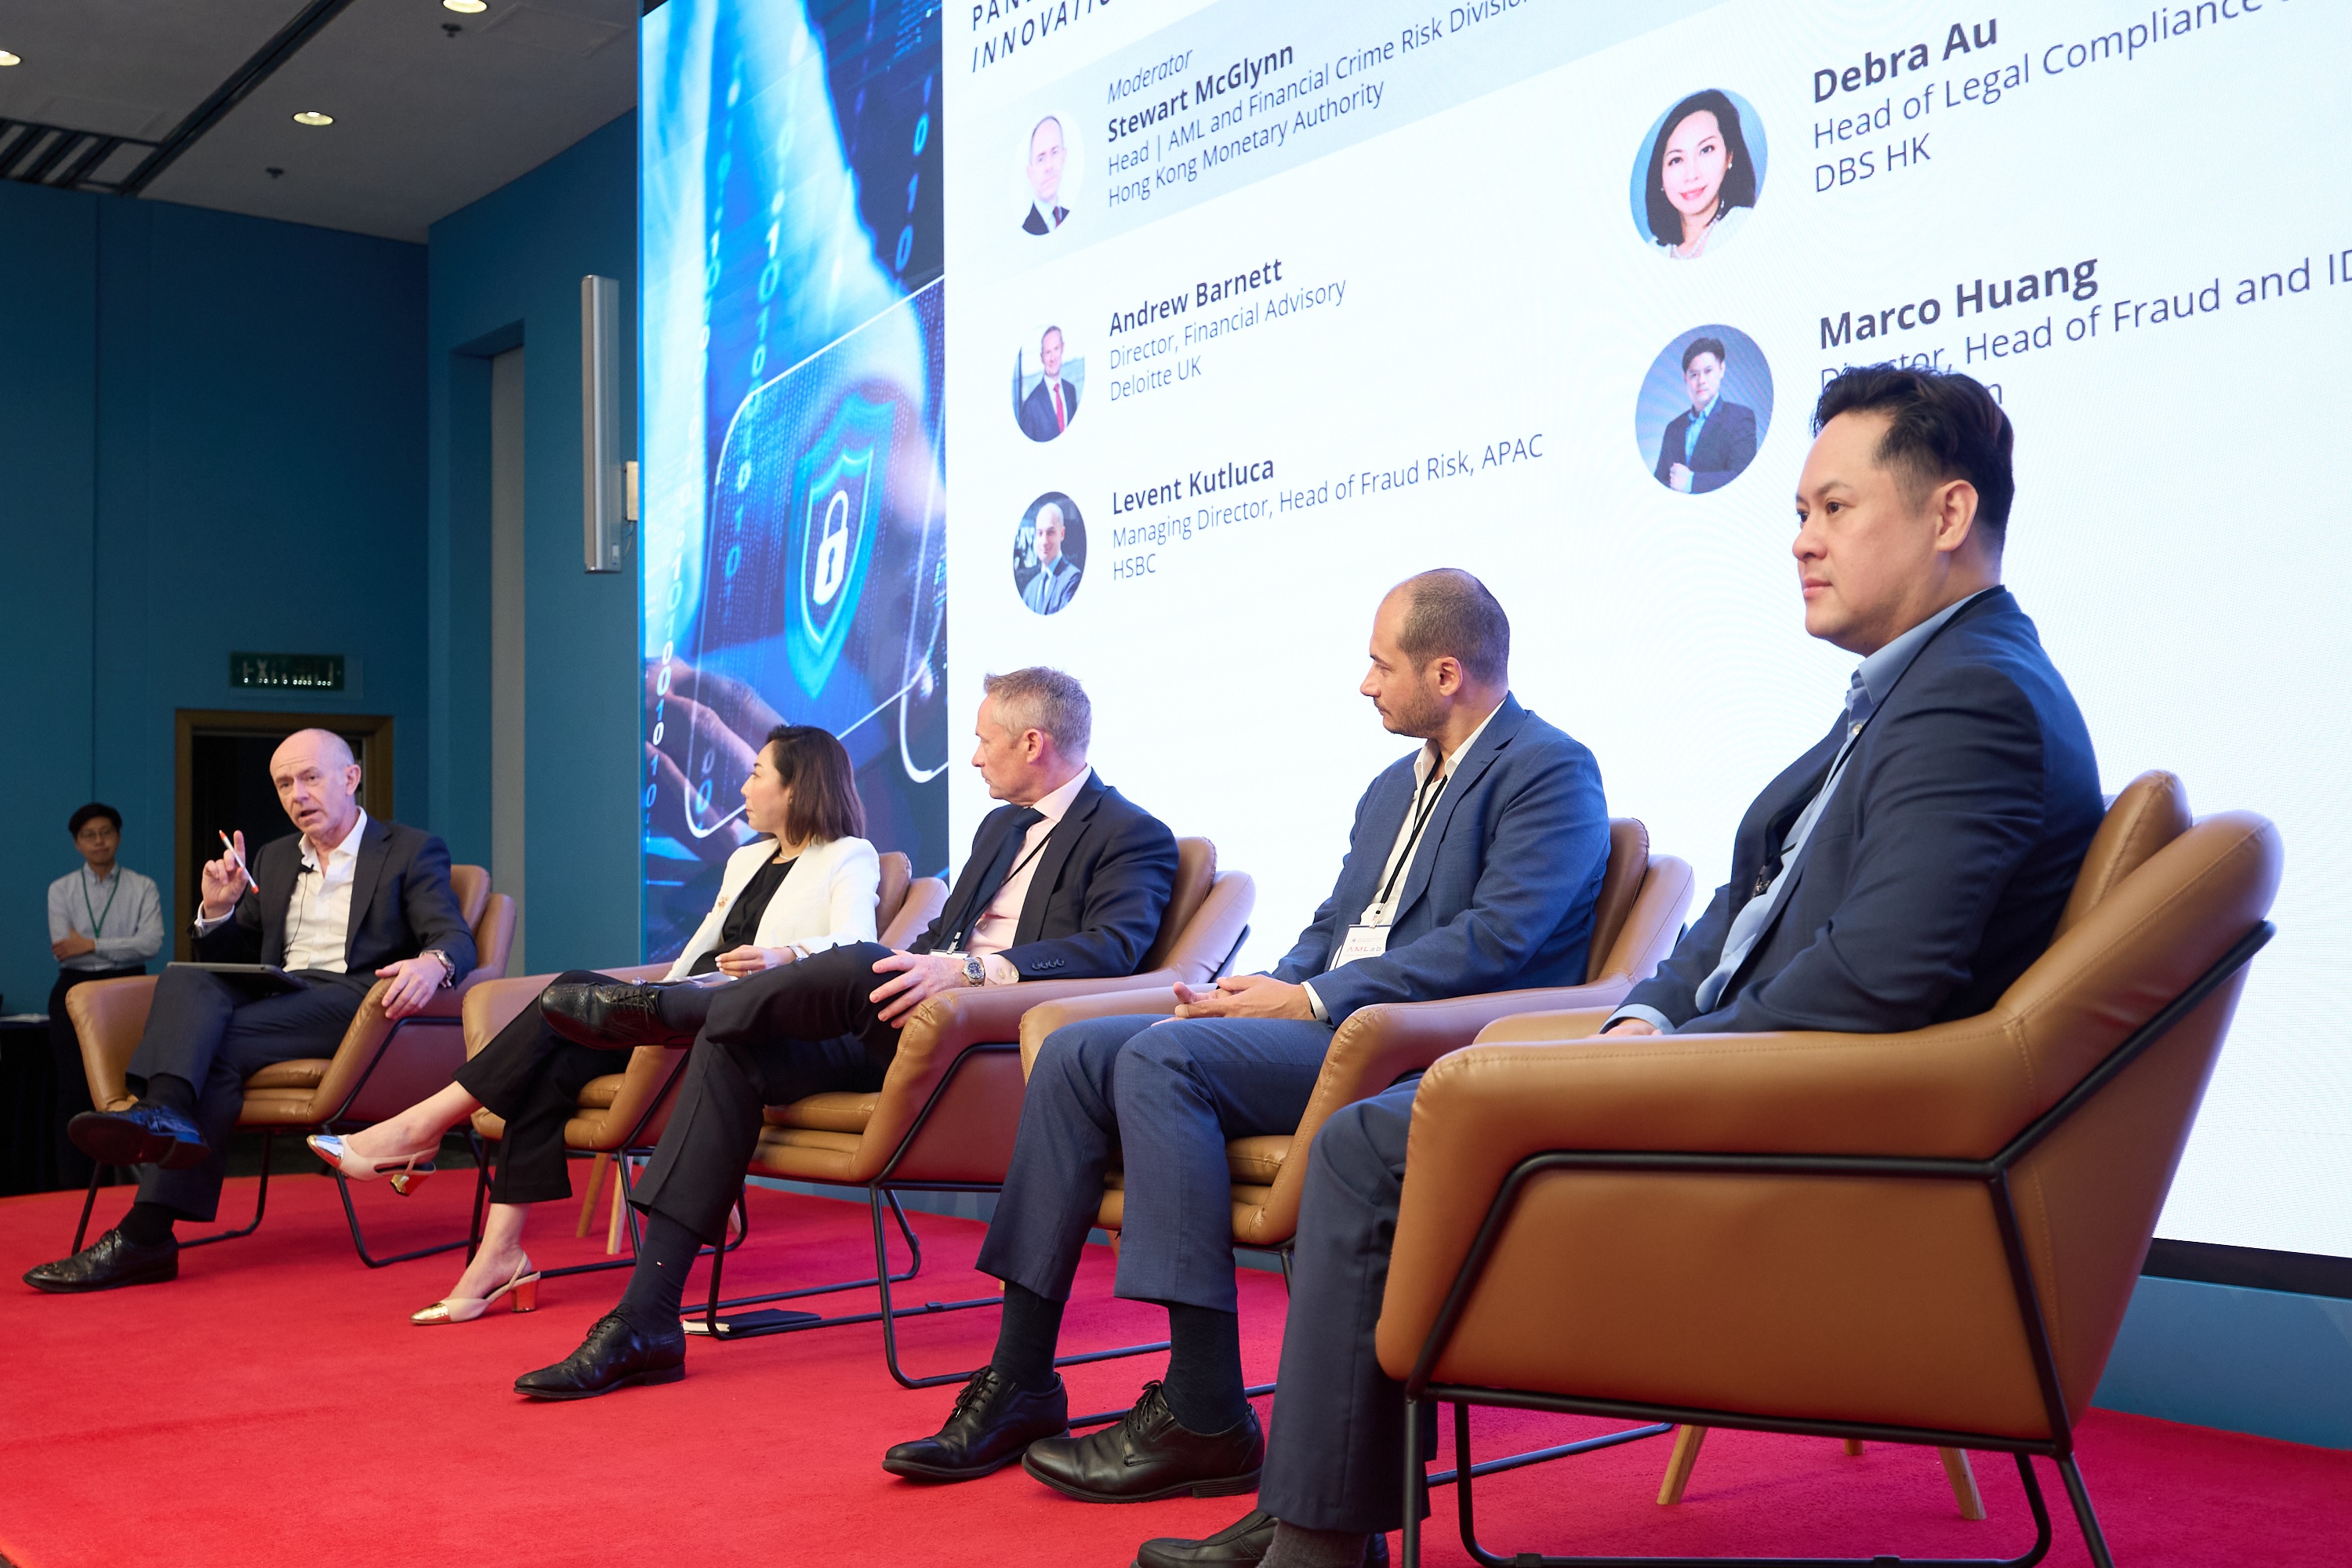 Senior representatives from the Hong Kong Monetary Authority, banks and technology firms share insights in a panel discussion on using Regtech solutions to detect and disrupt fraud.